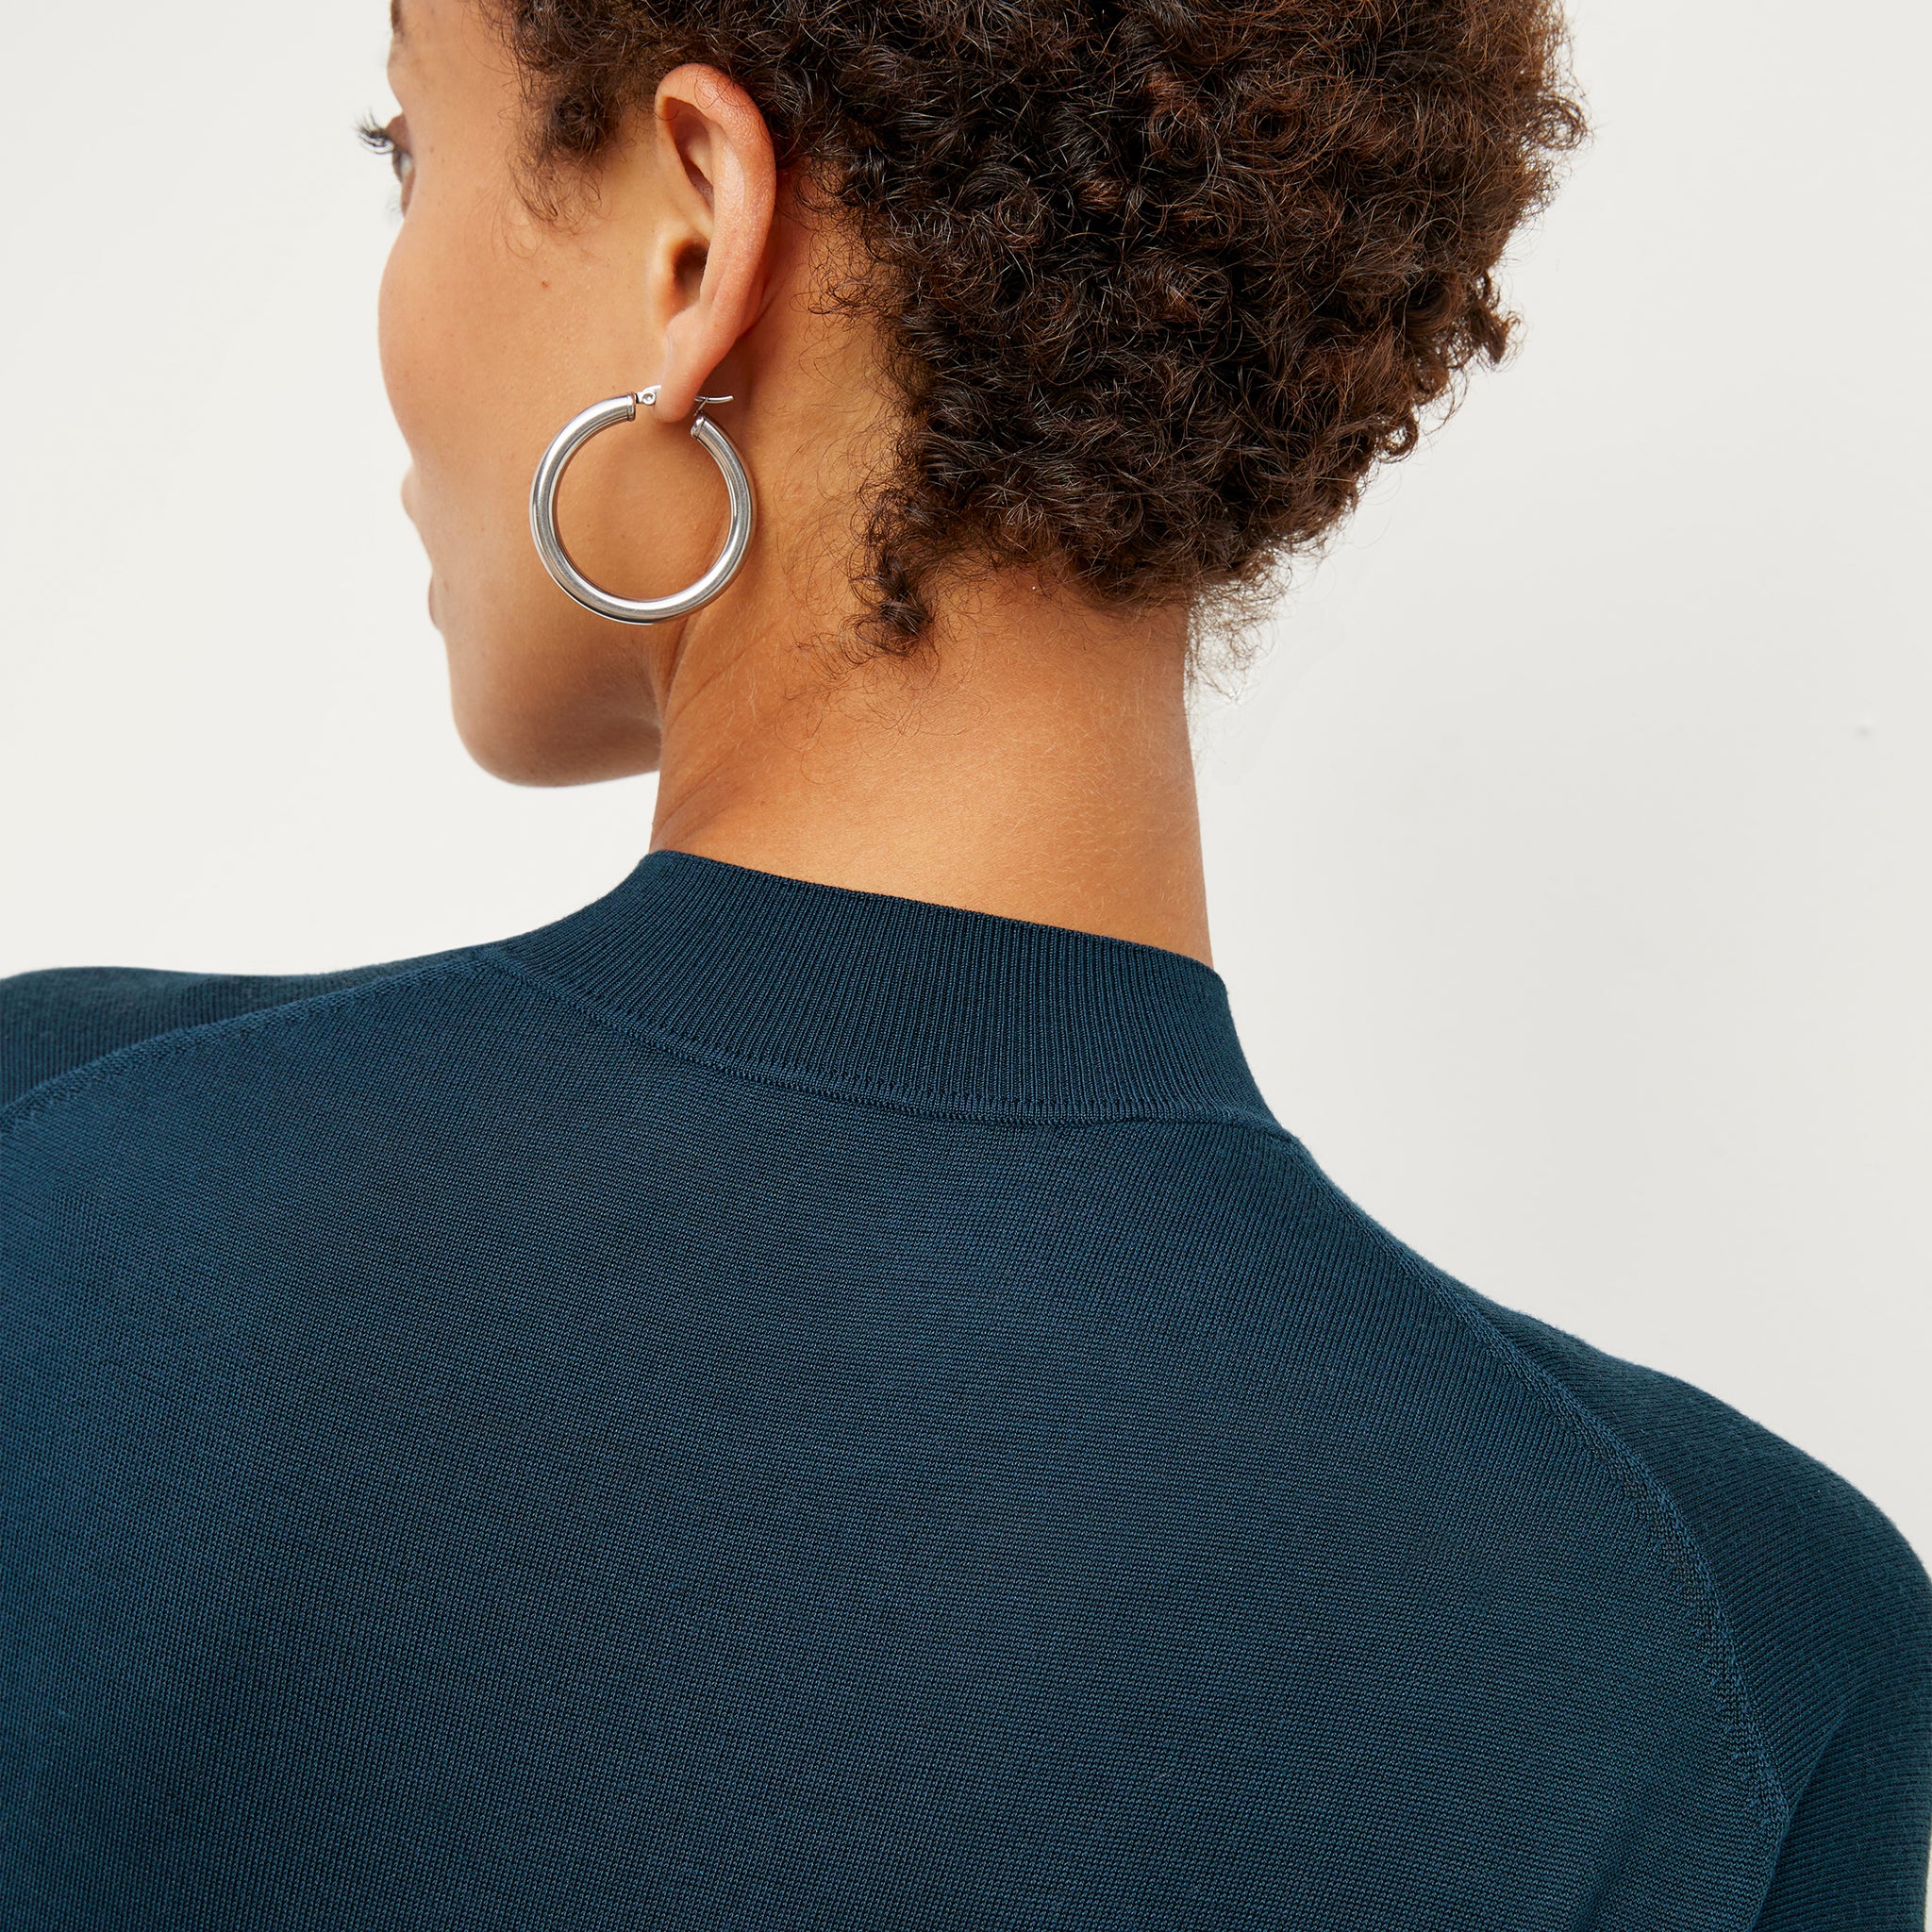 Detail image of a woman standing wearing the Claressa Earrrings Medium in Silver